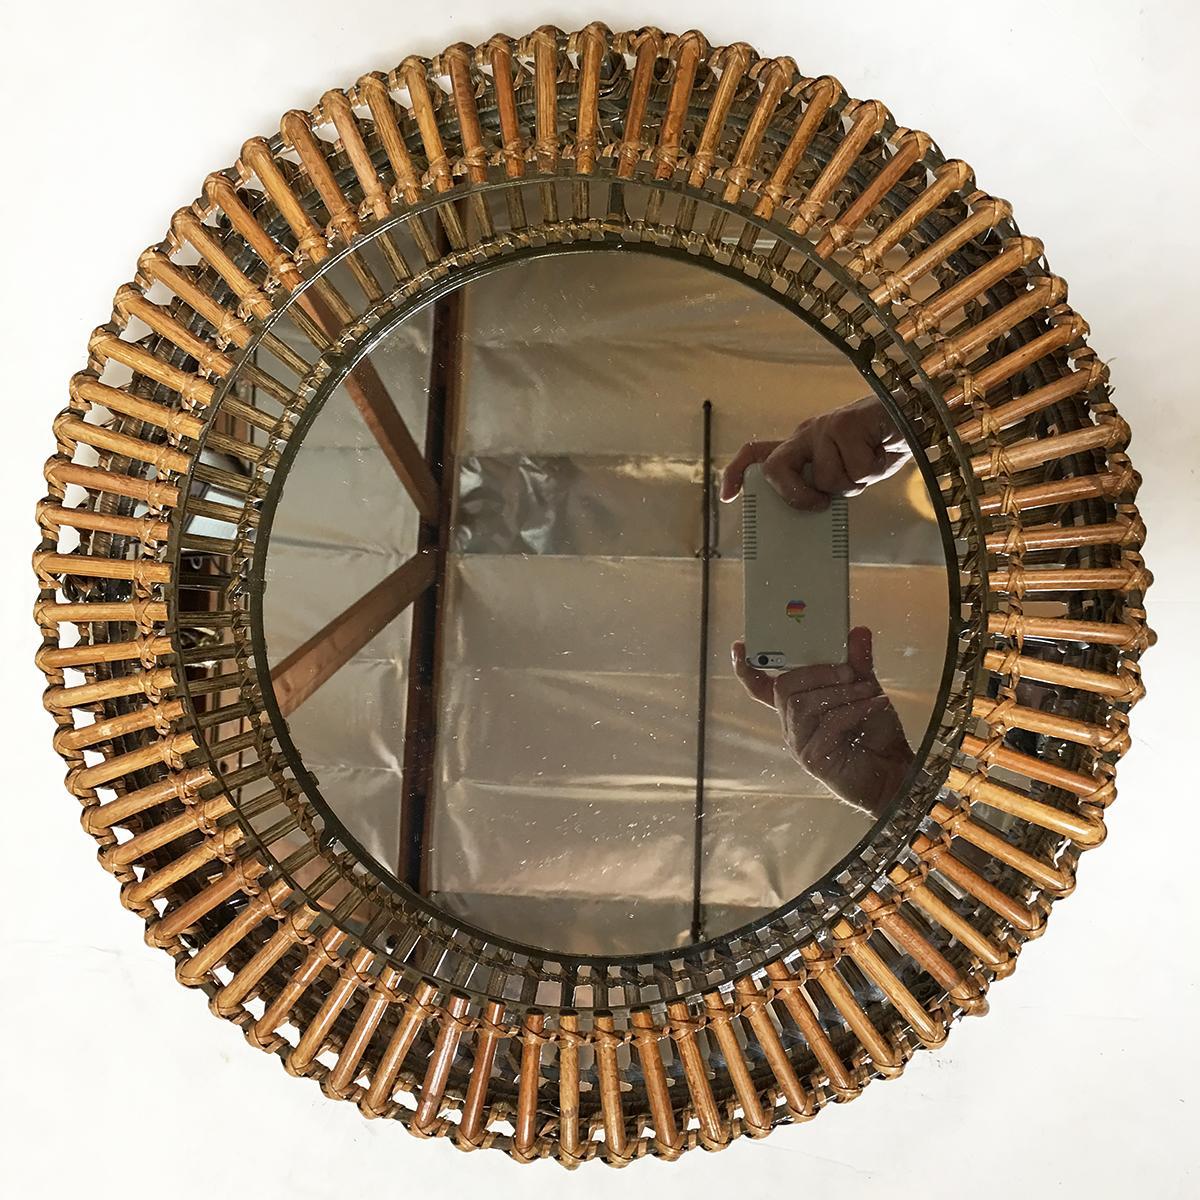 Vintage 1990s umbra wall mirror designed by Matt Carr featuring Albini style edge. Measures: 15.5” wide x 2.5” deep.